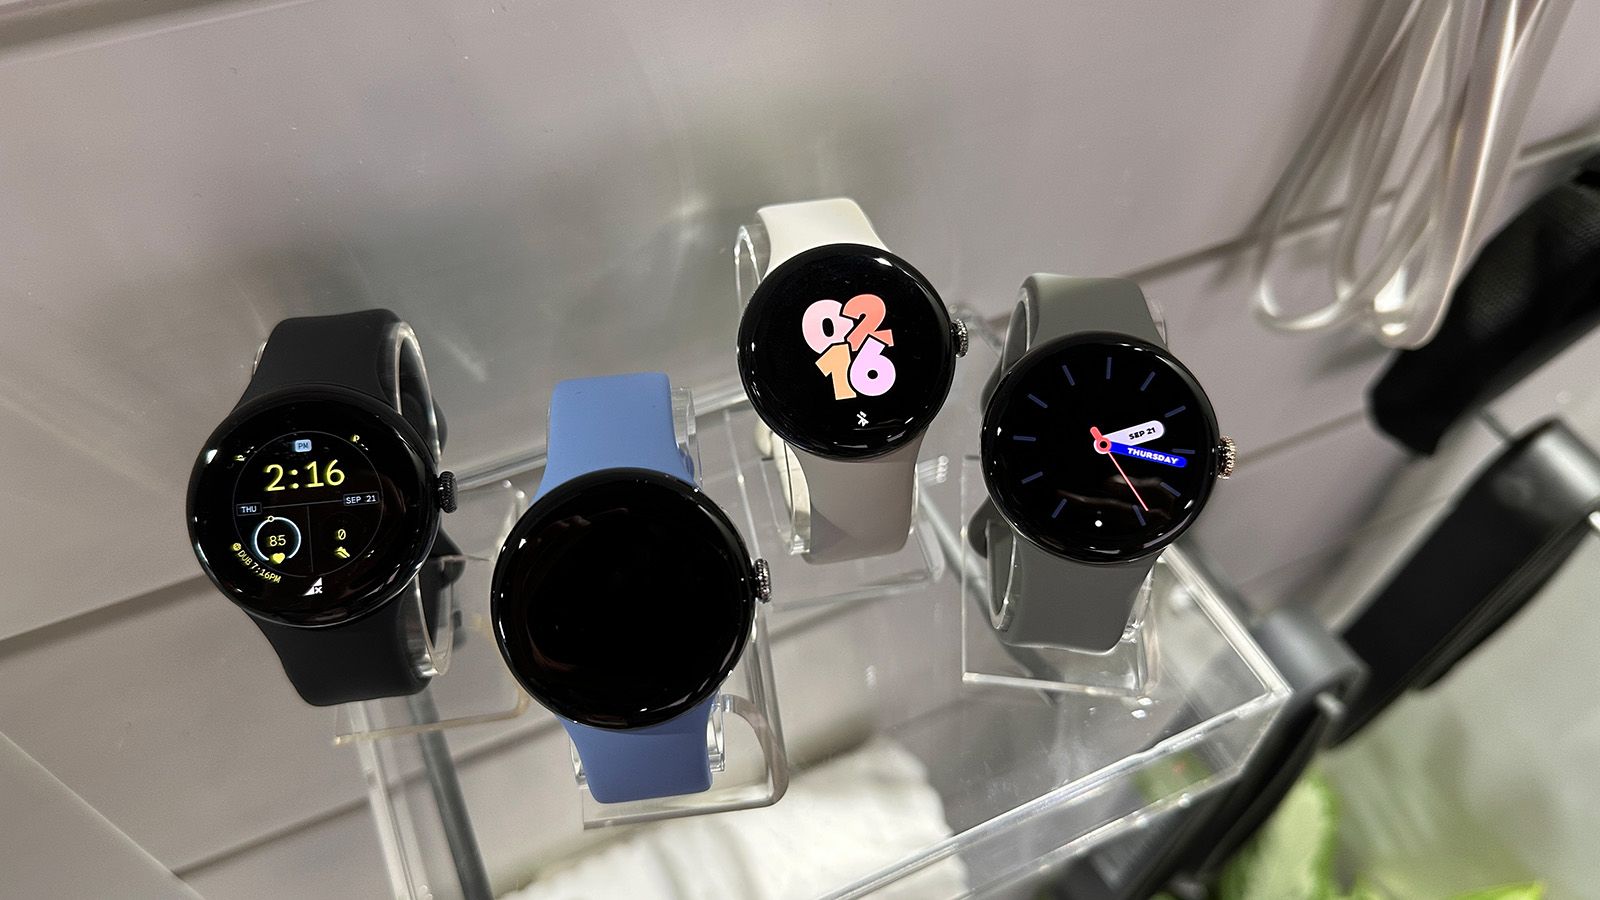 Everything You Need to Know About the Google Pixel Watch